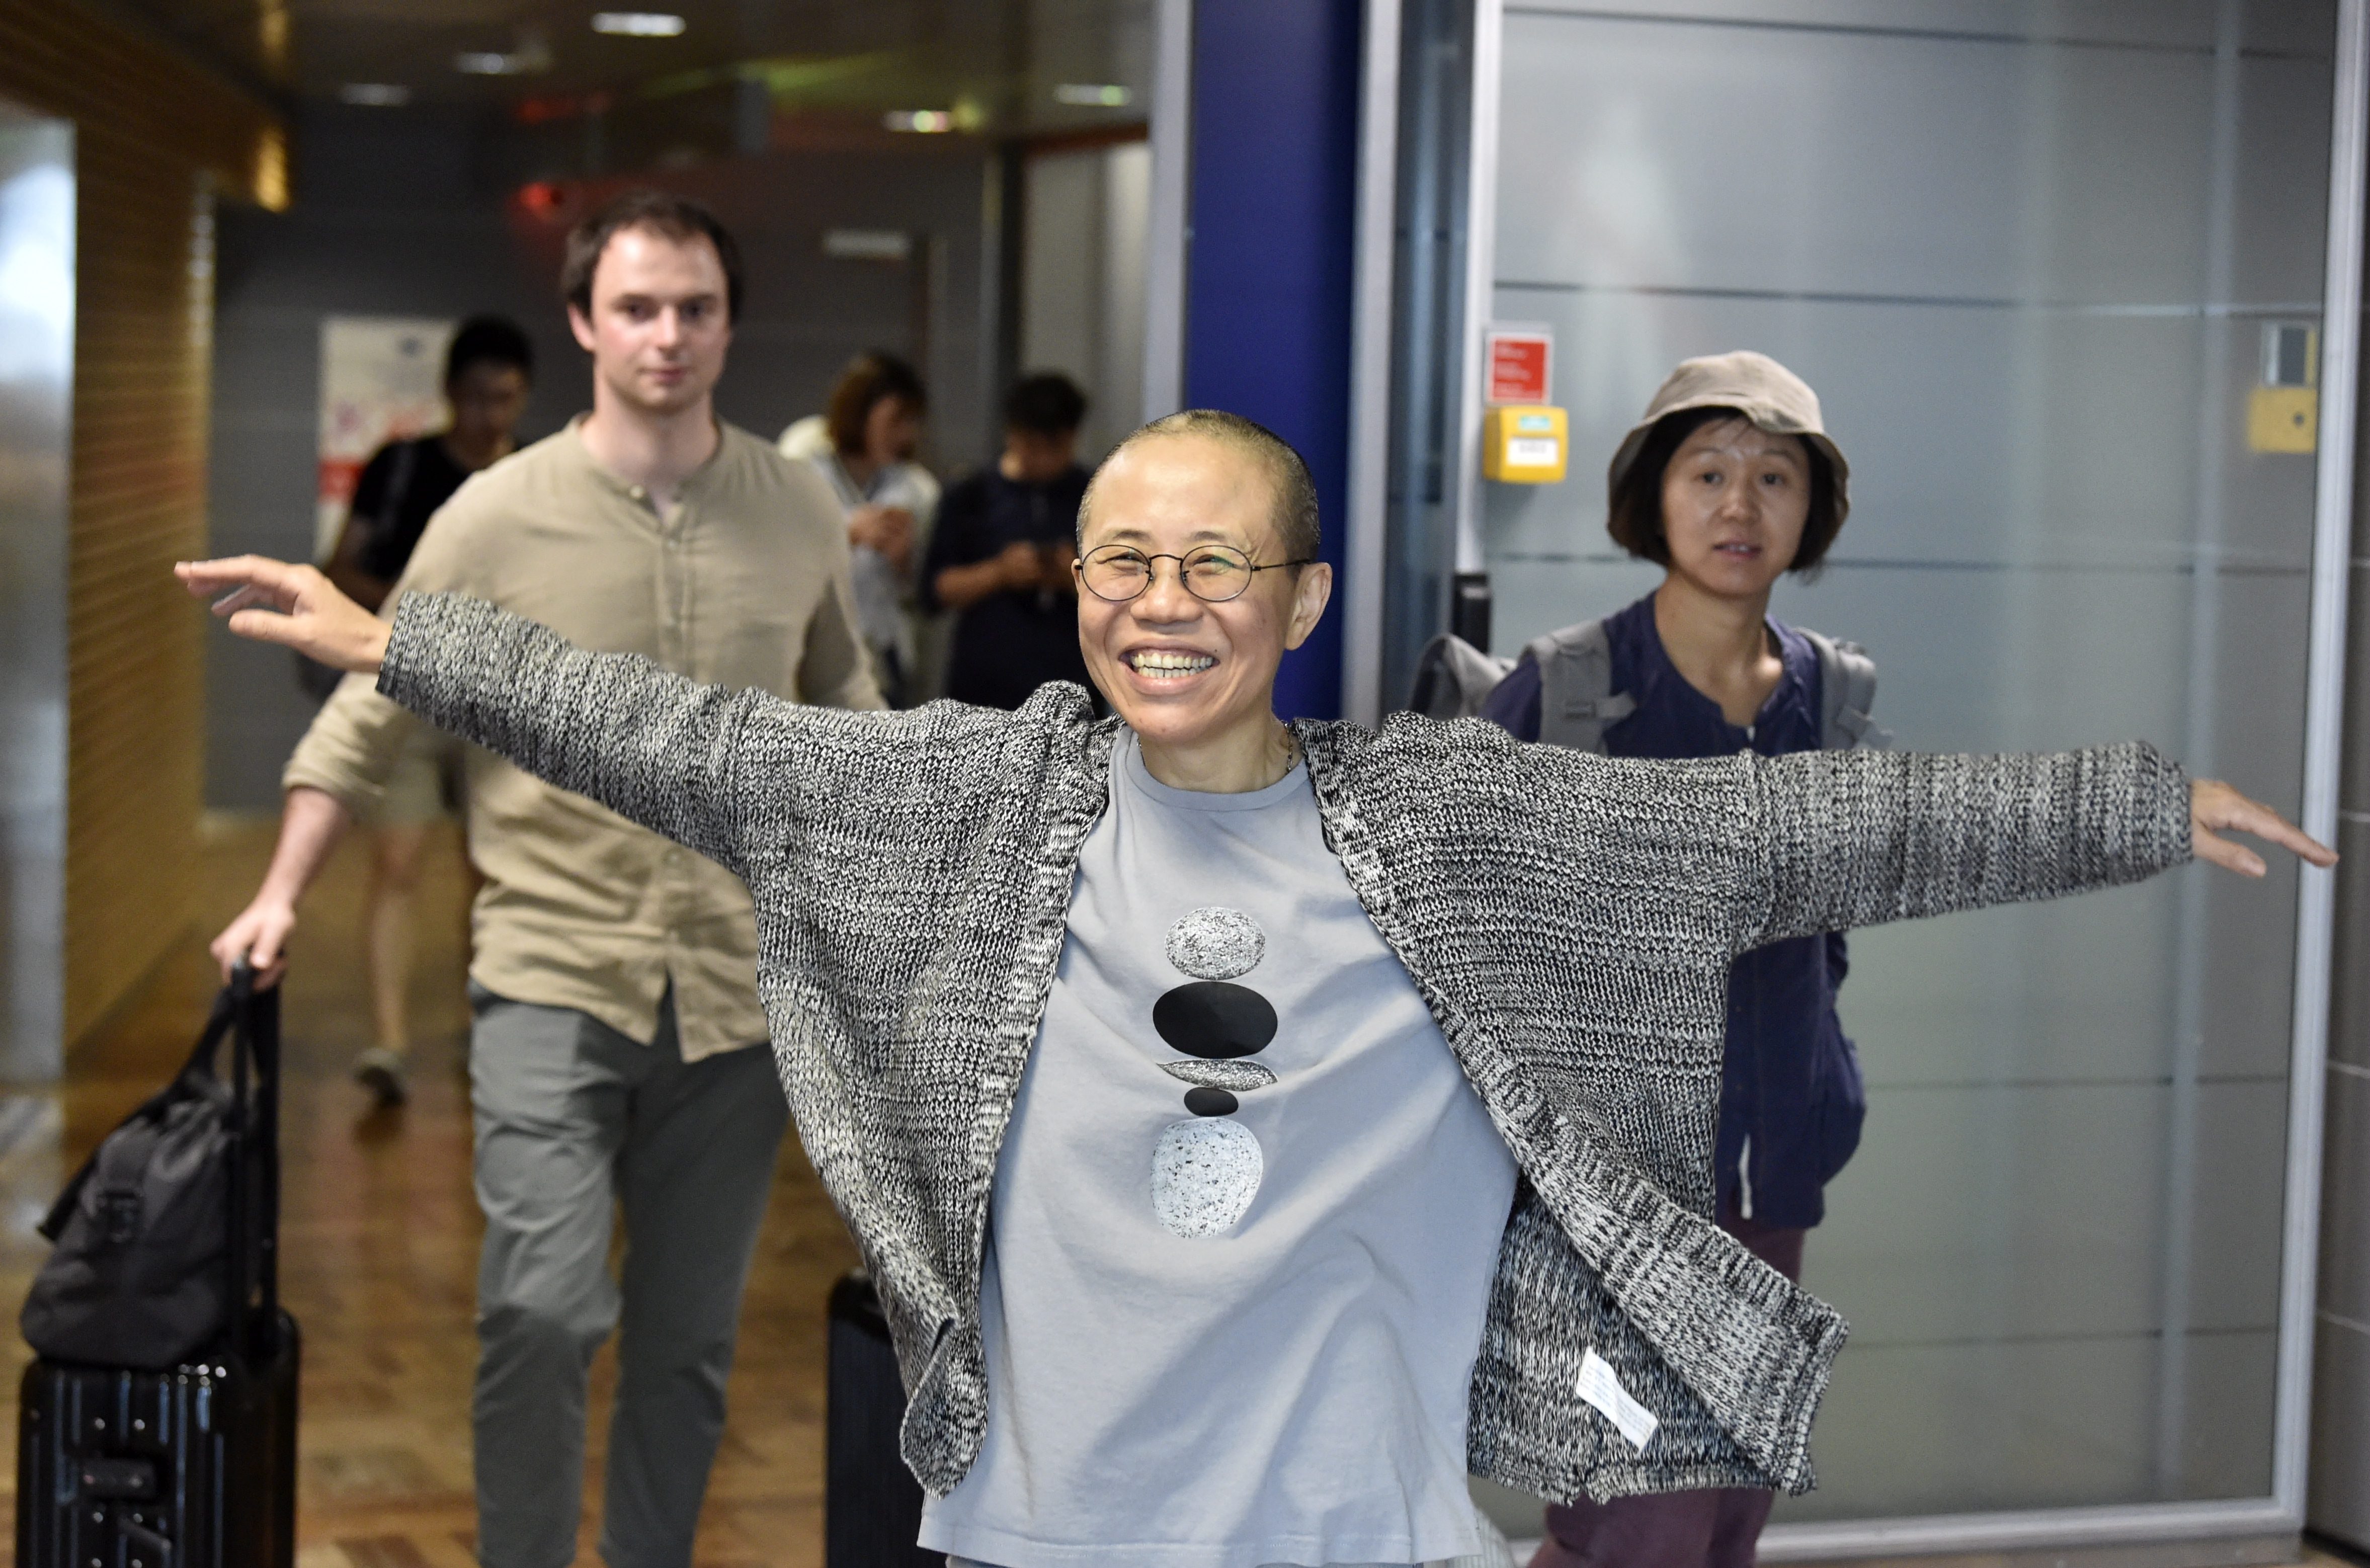 Liu Xia, the widow of Chinese Nobel dissident Liu Xiaobo, smiles as she arrives at the Helsinki International Airport in Vantaa, Finland, on July 10, 2018. (JUSSI NUKARI—AFP/Getty Images)